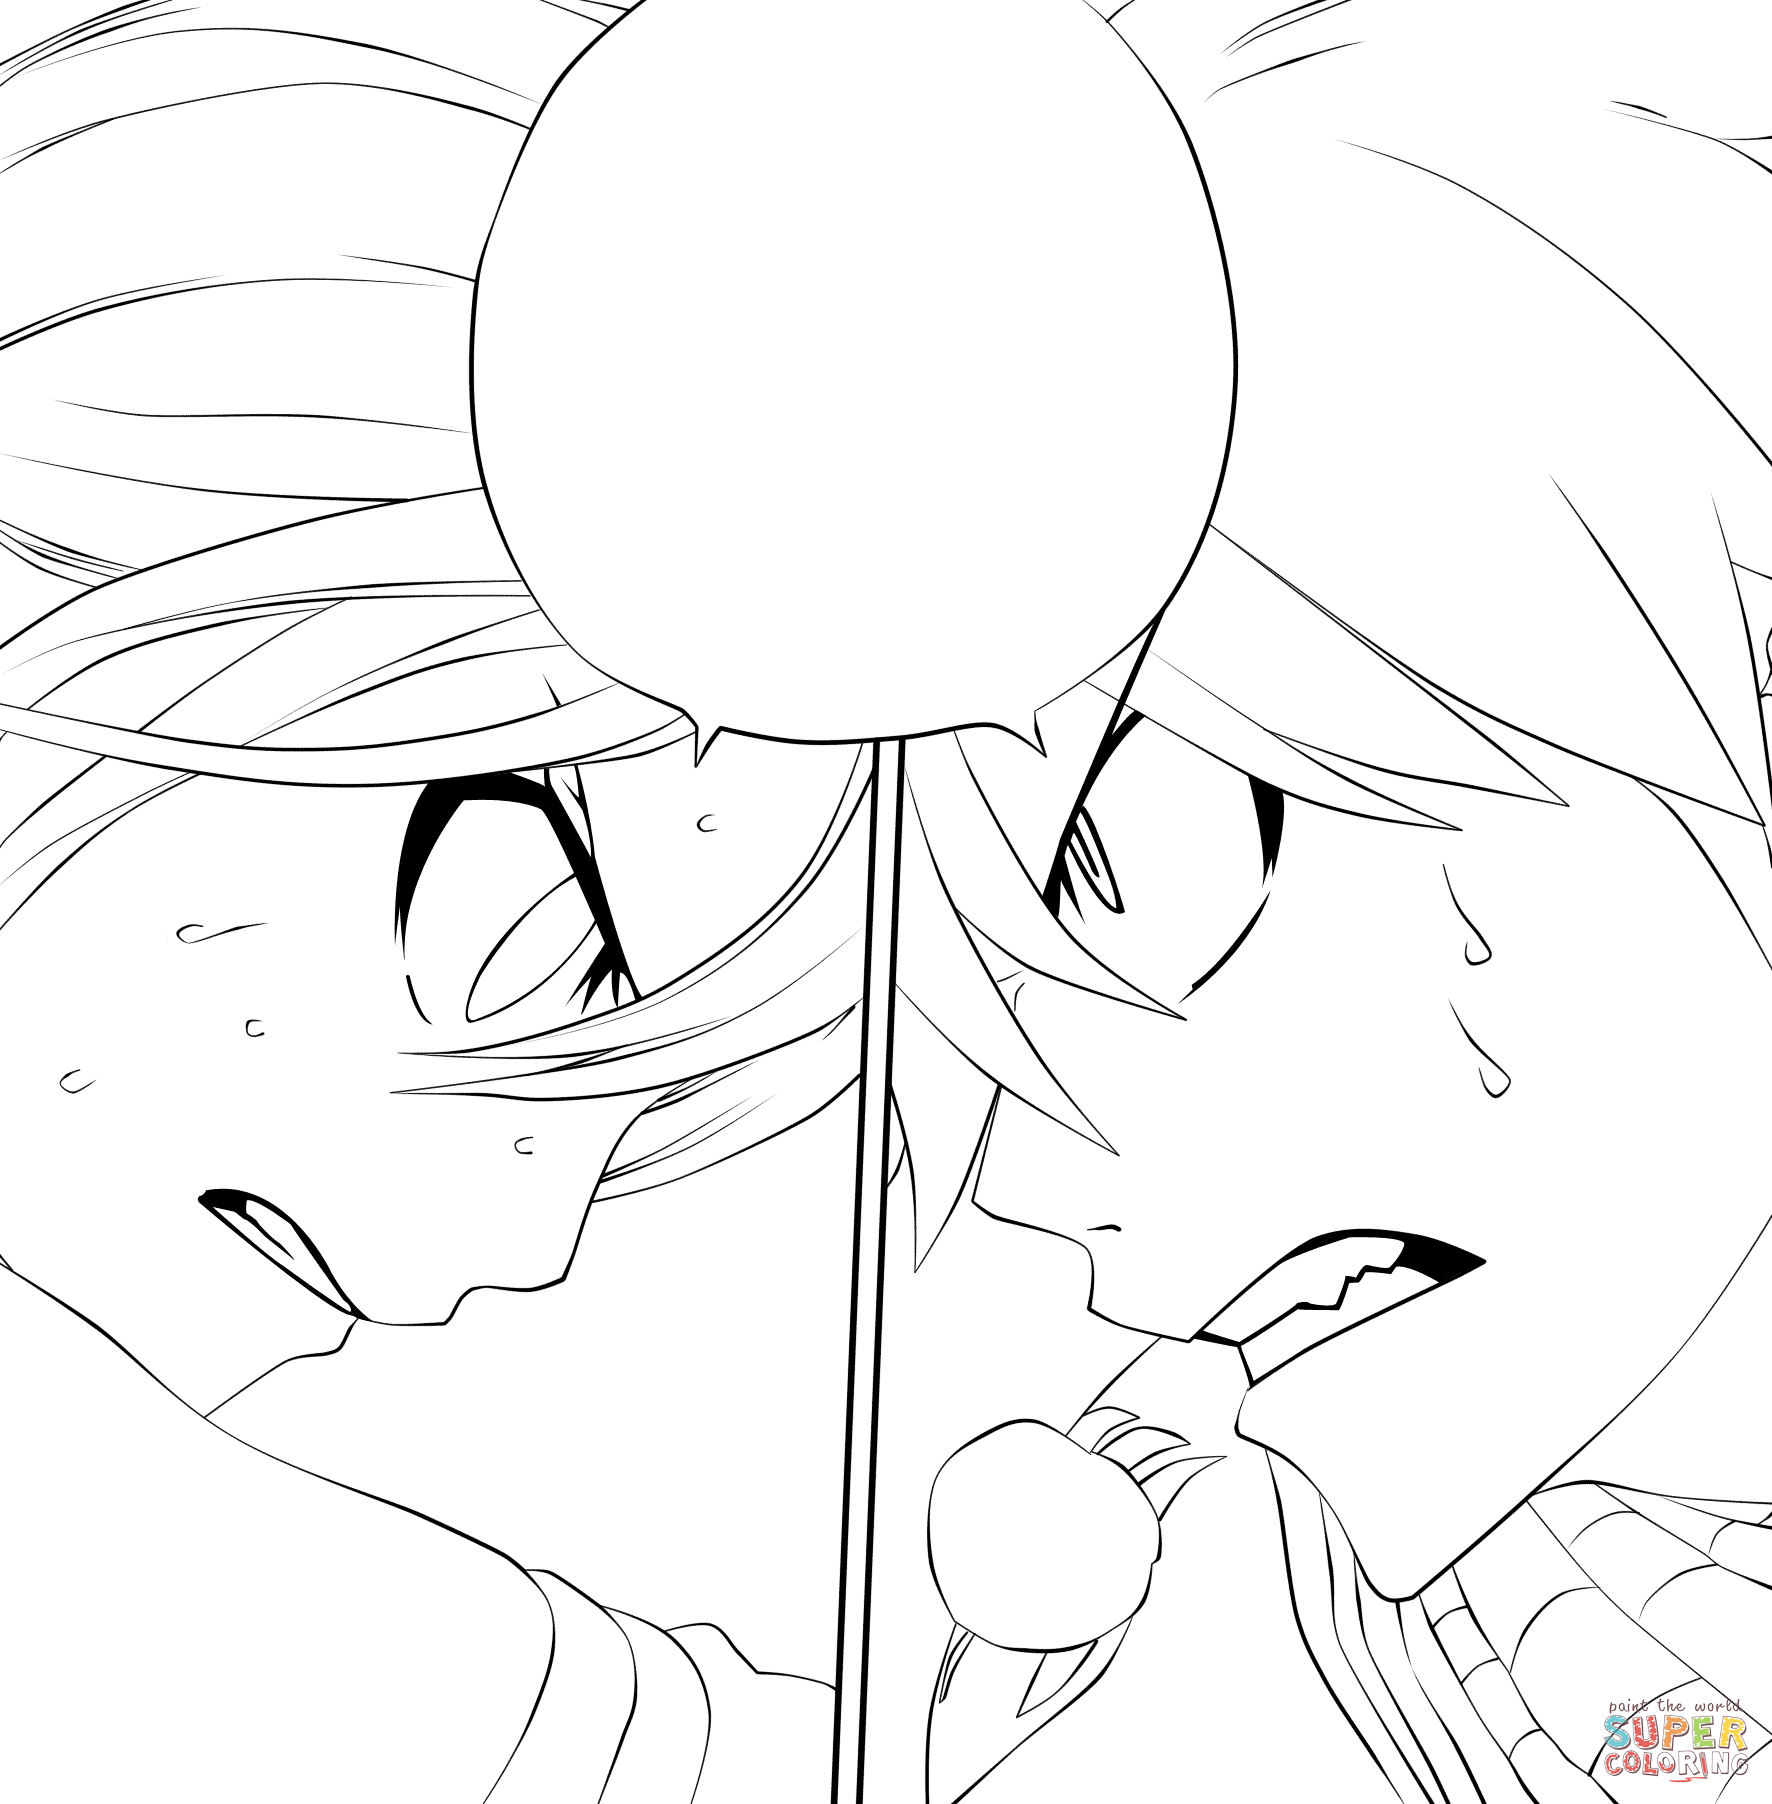 Natsu Dragneel And Lucy Heartfilia From Fairy Tail Manga destiné Coloriage Fairy Tail A Imprimer